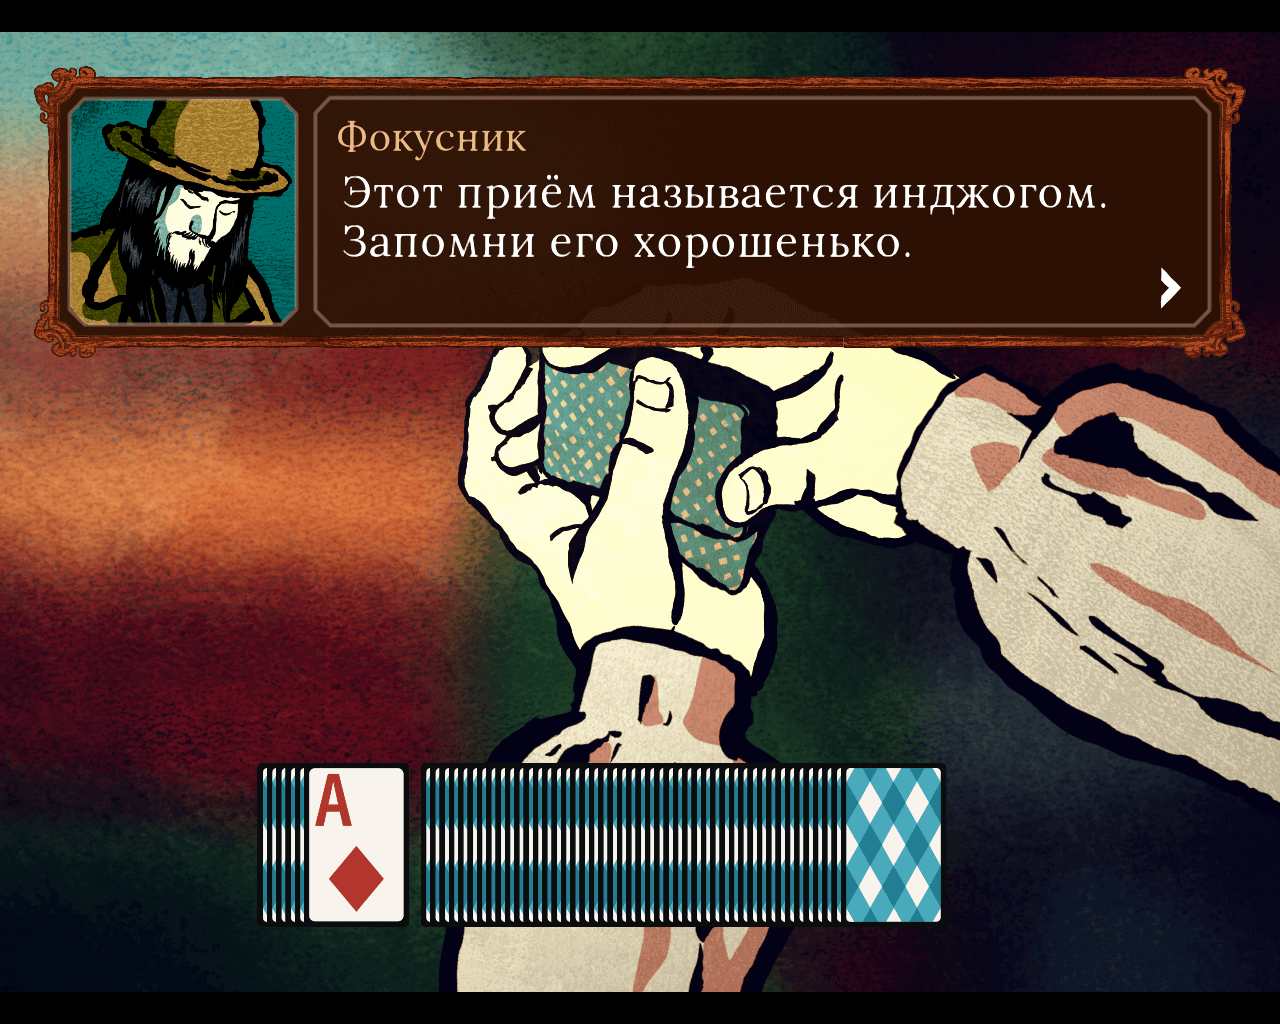 Learn another trick. Card Shark is replete with cheating slang, which works for immersion, but clutters your head with a ton of information.